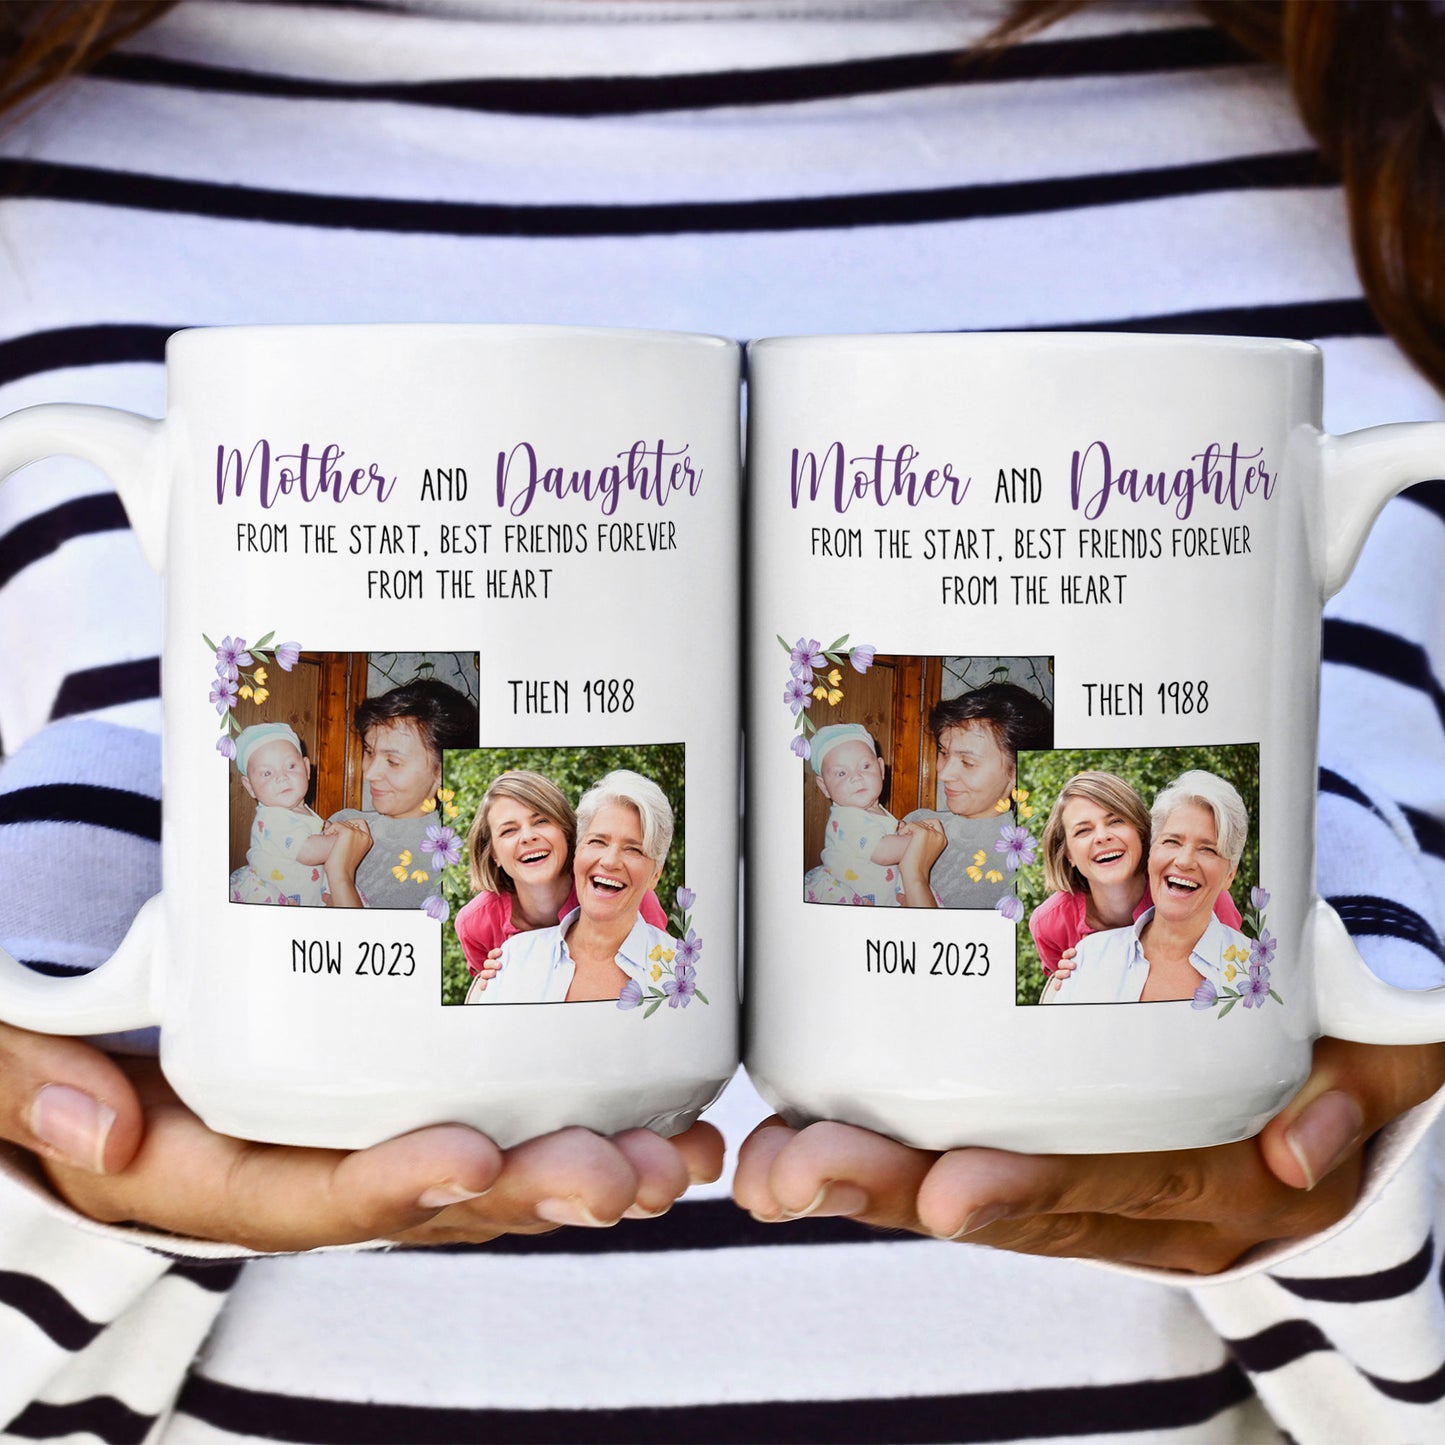 Mother And Daughter From The Start - Personalized Photo Mug